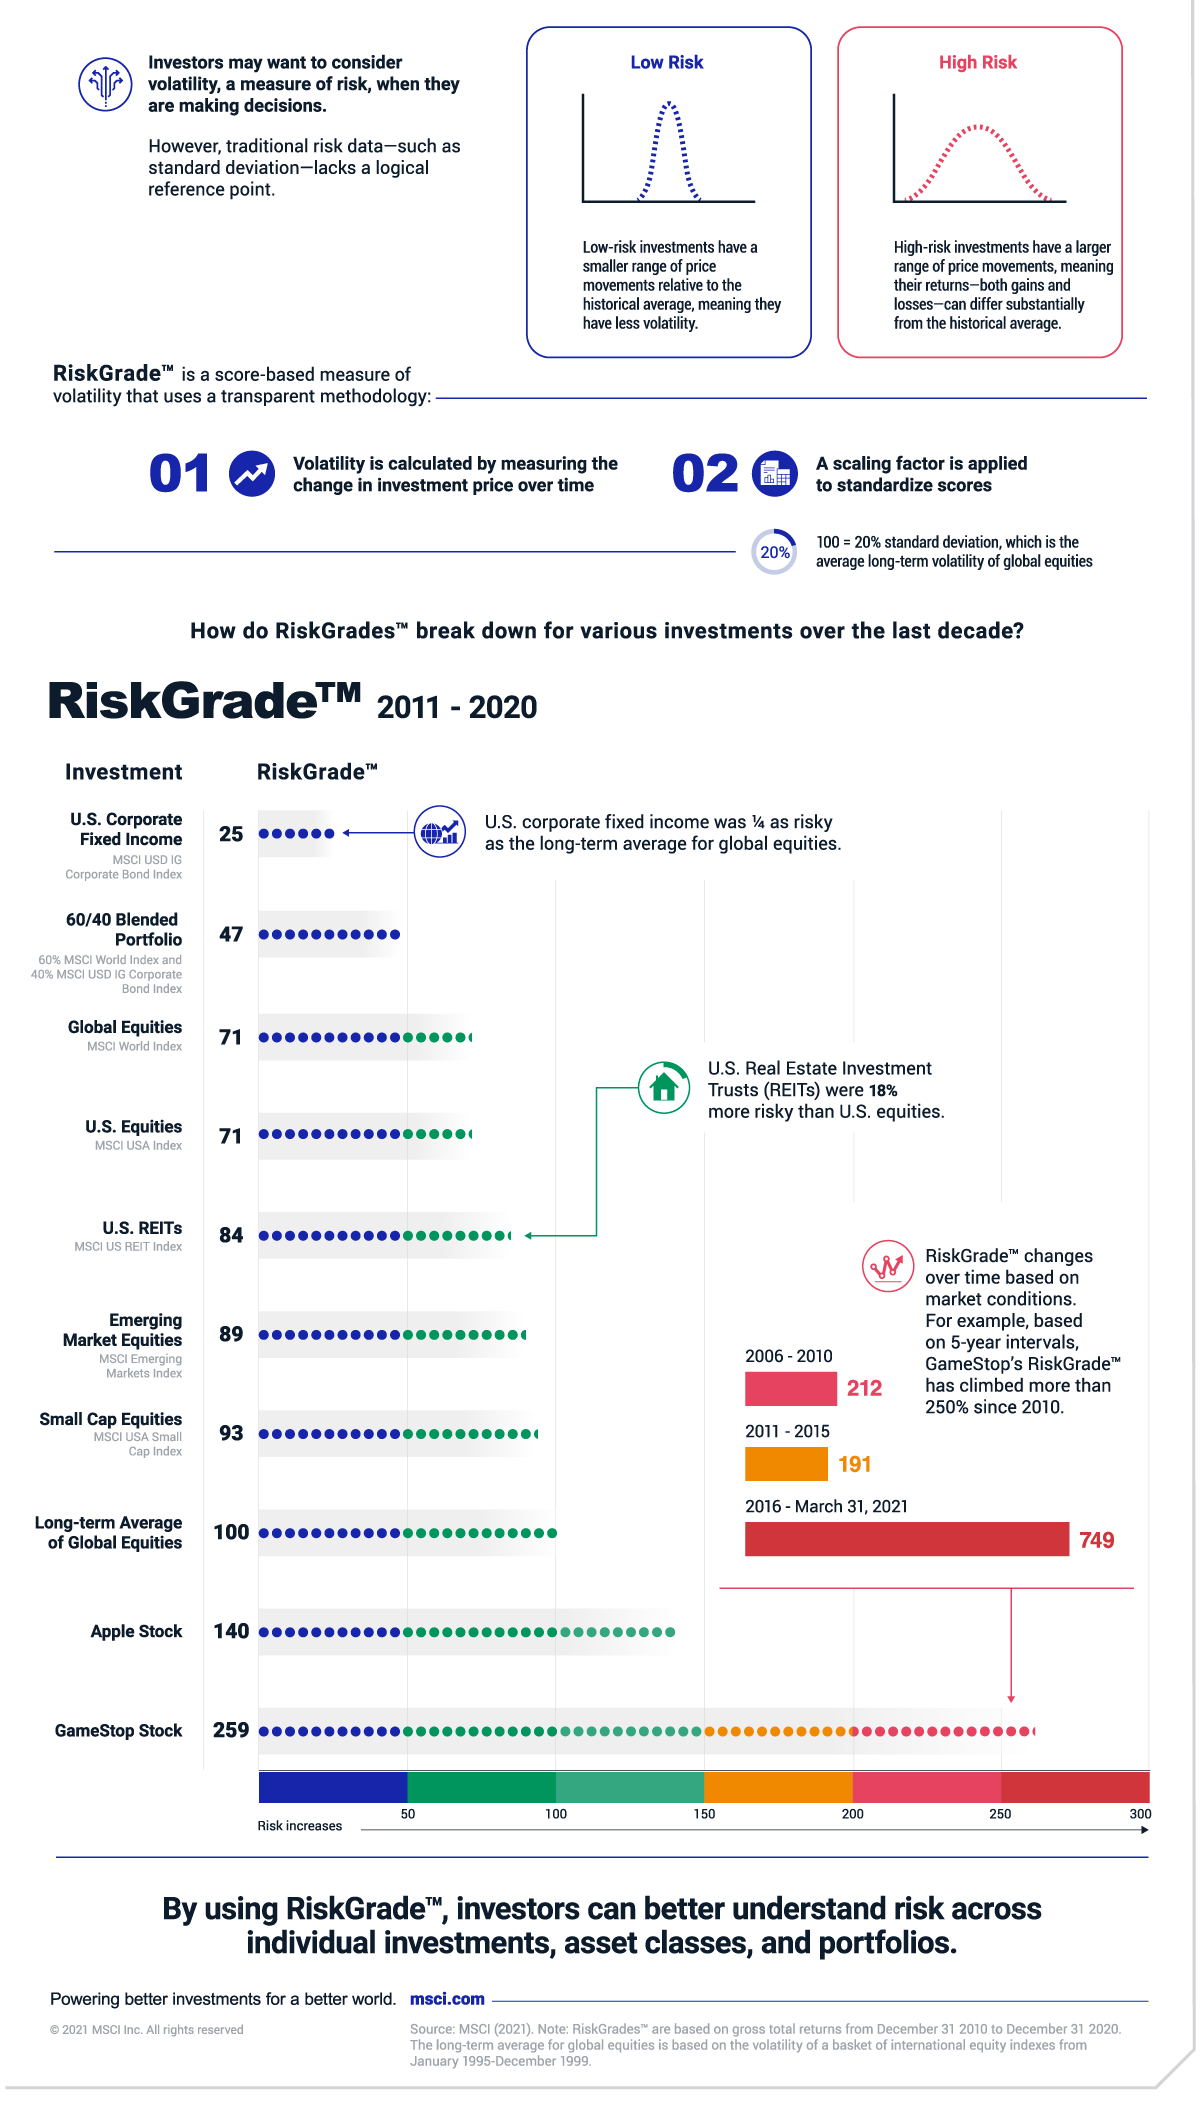 By using RiskGrade, investors can better understand risk across individual investments, asset classes, and portfolios.